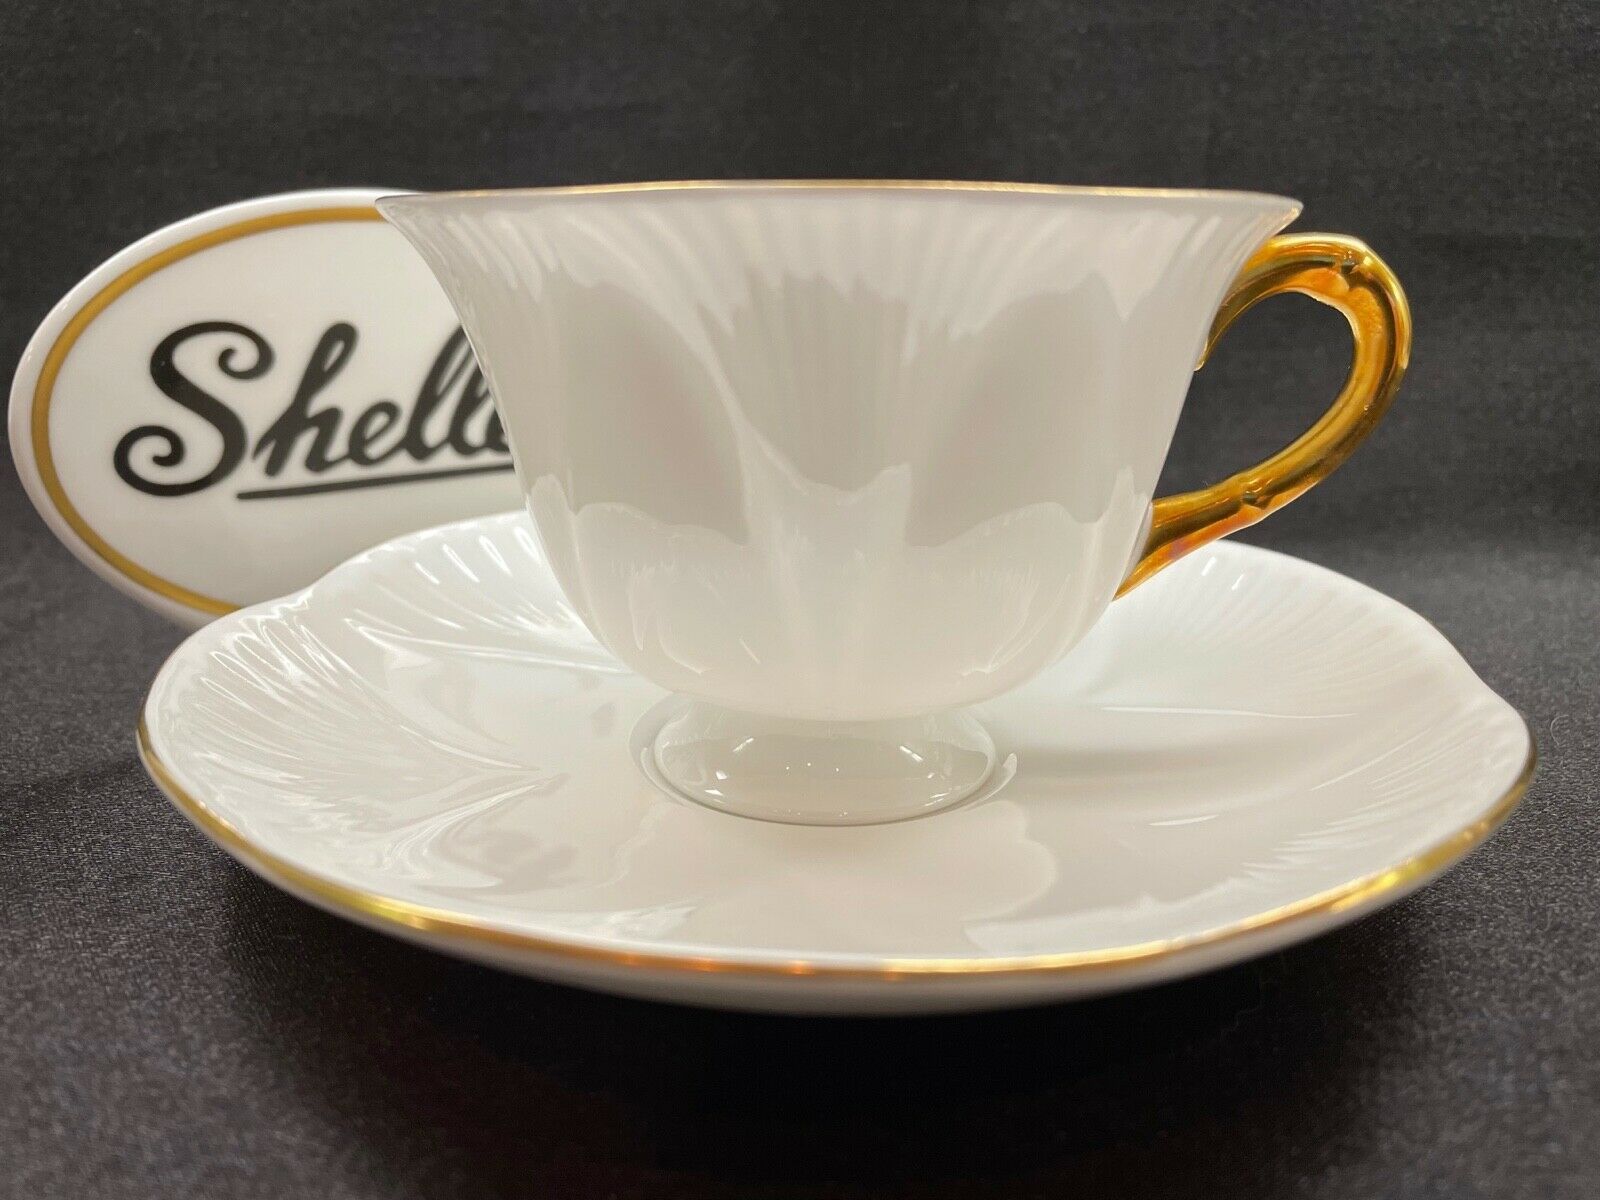 SHELLEY  DAINTY  REGENCY  FOOTED CUP AND SAUCER   -   GOLD TRIM